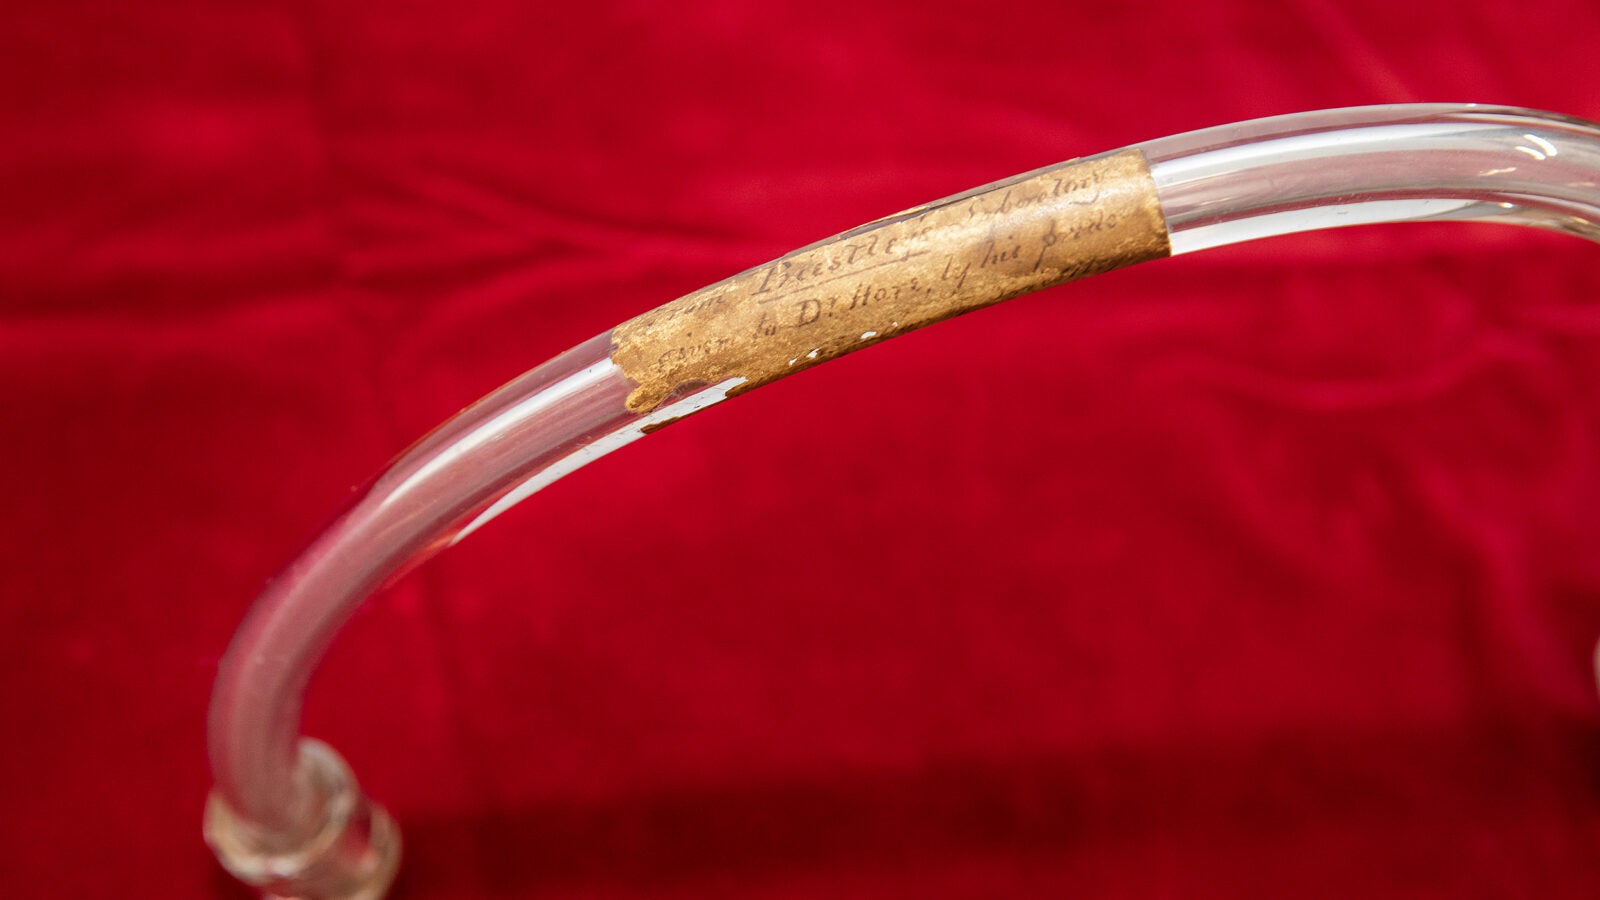 8. This thick glass tube is a treasured relic of the great English chemist, Joseph Priestley